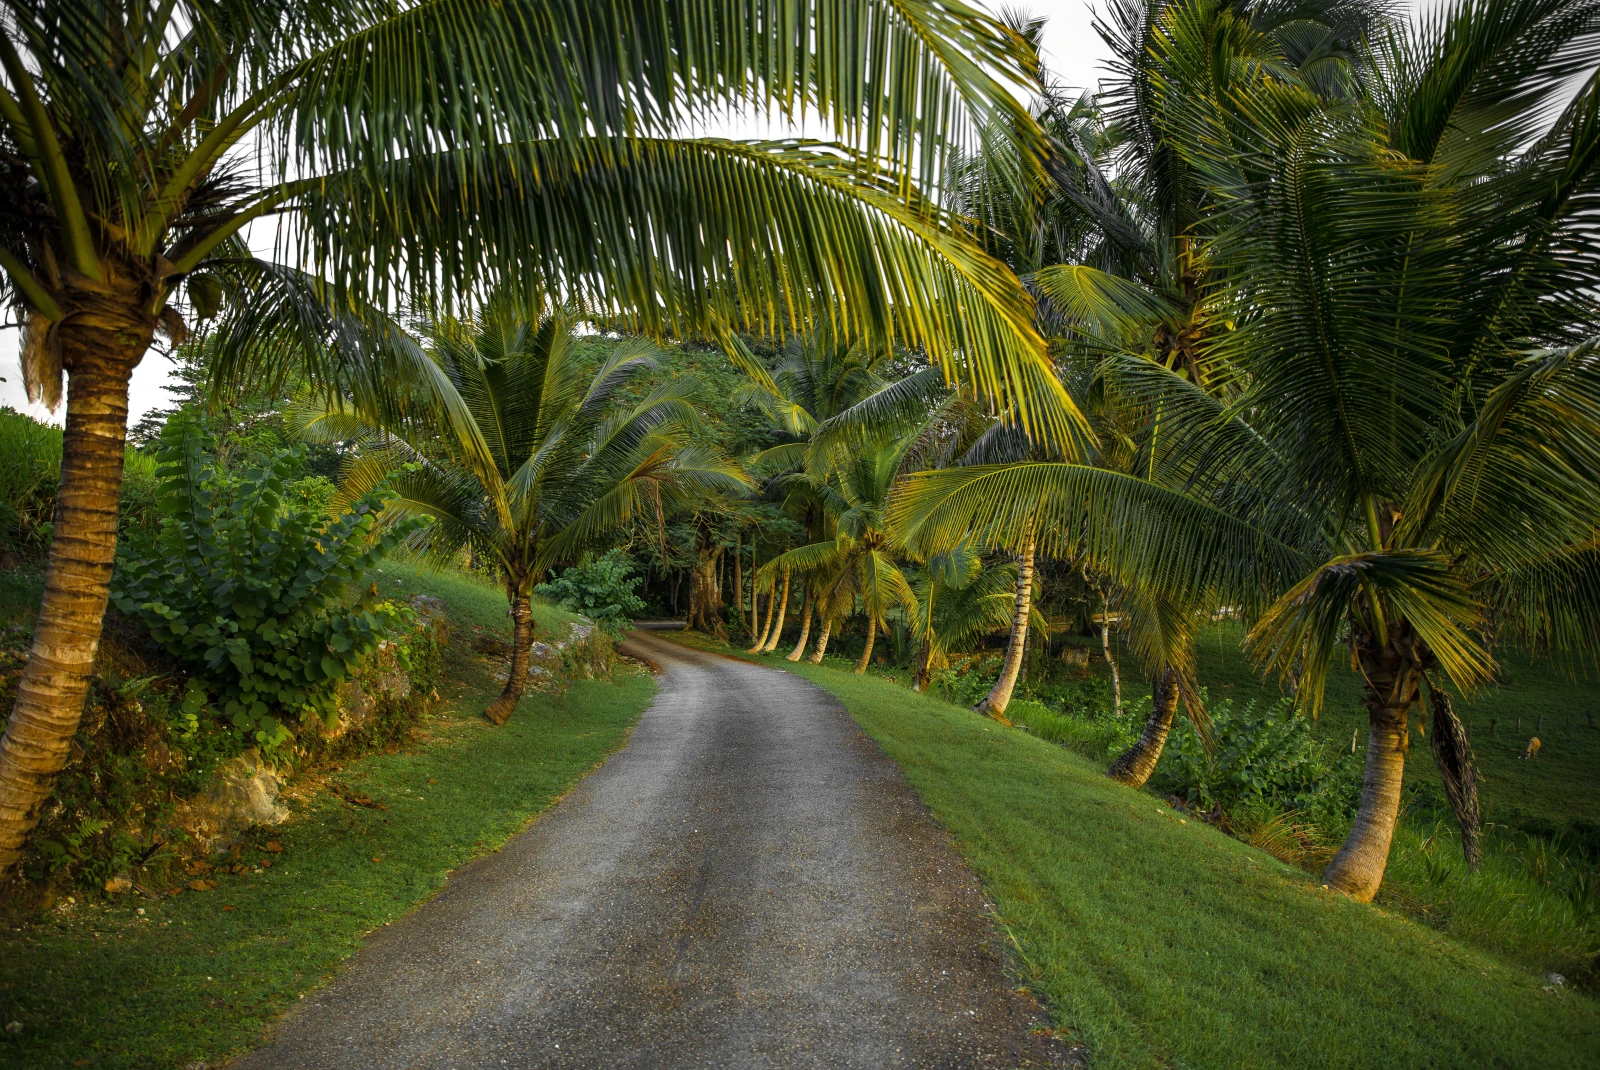 road surrounded by large palm trees during dusk